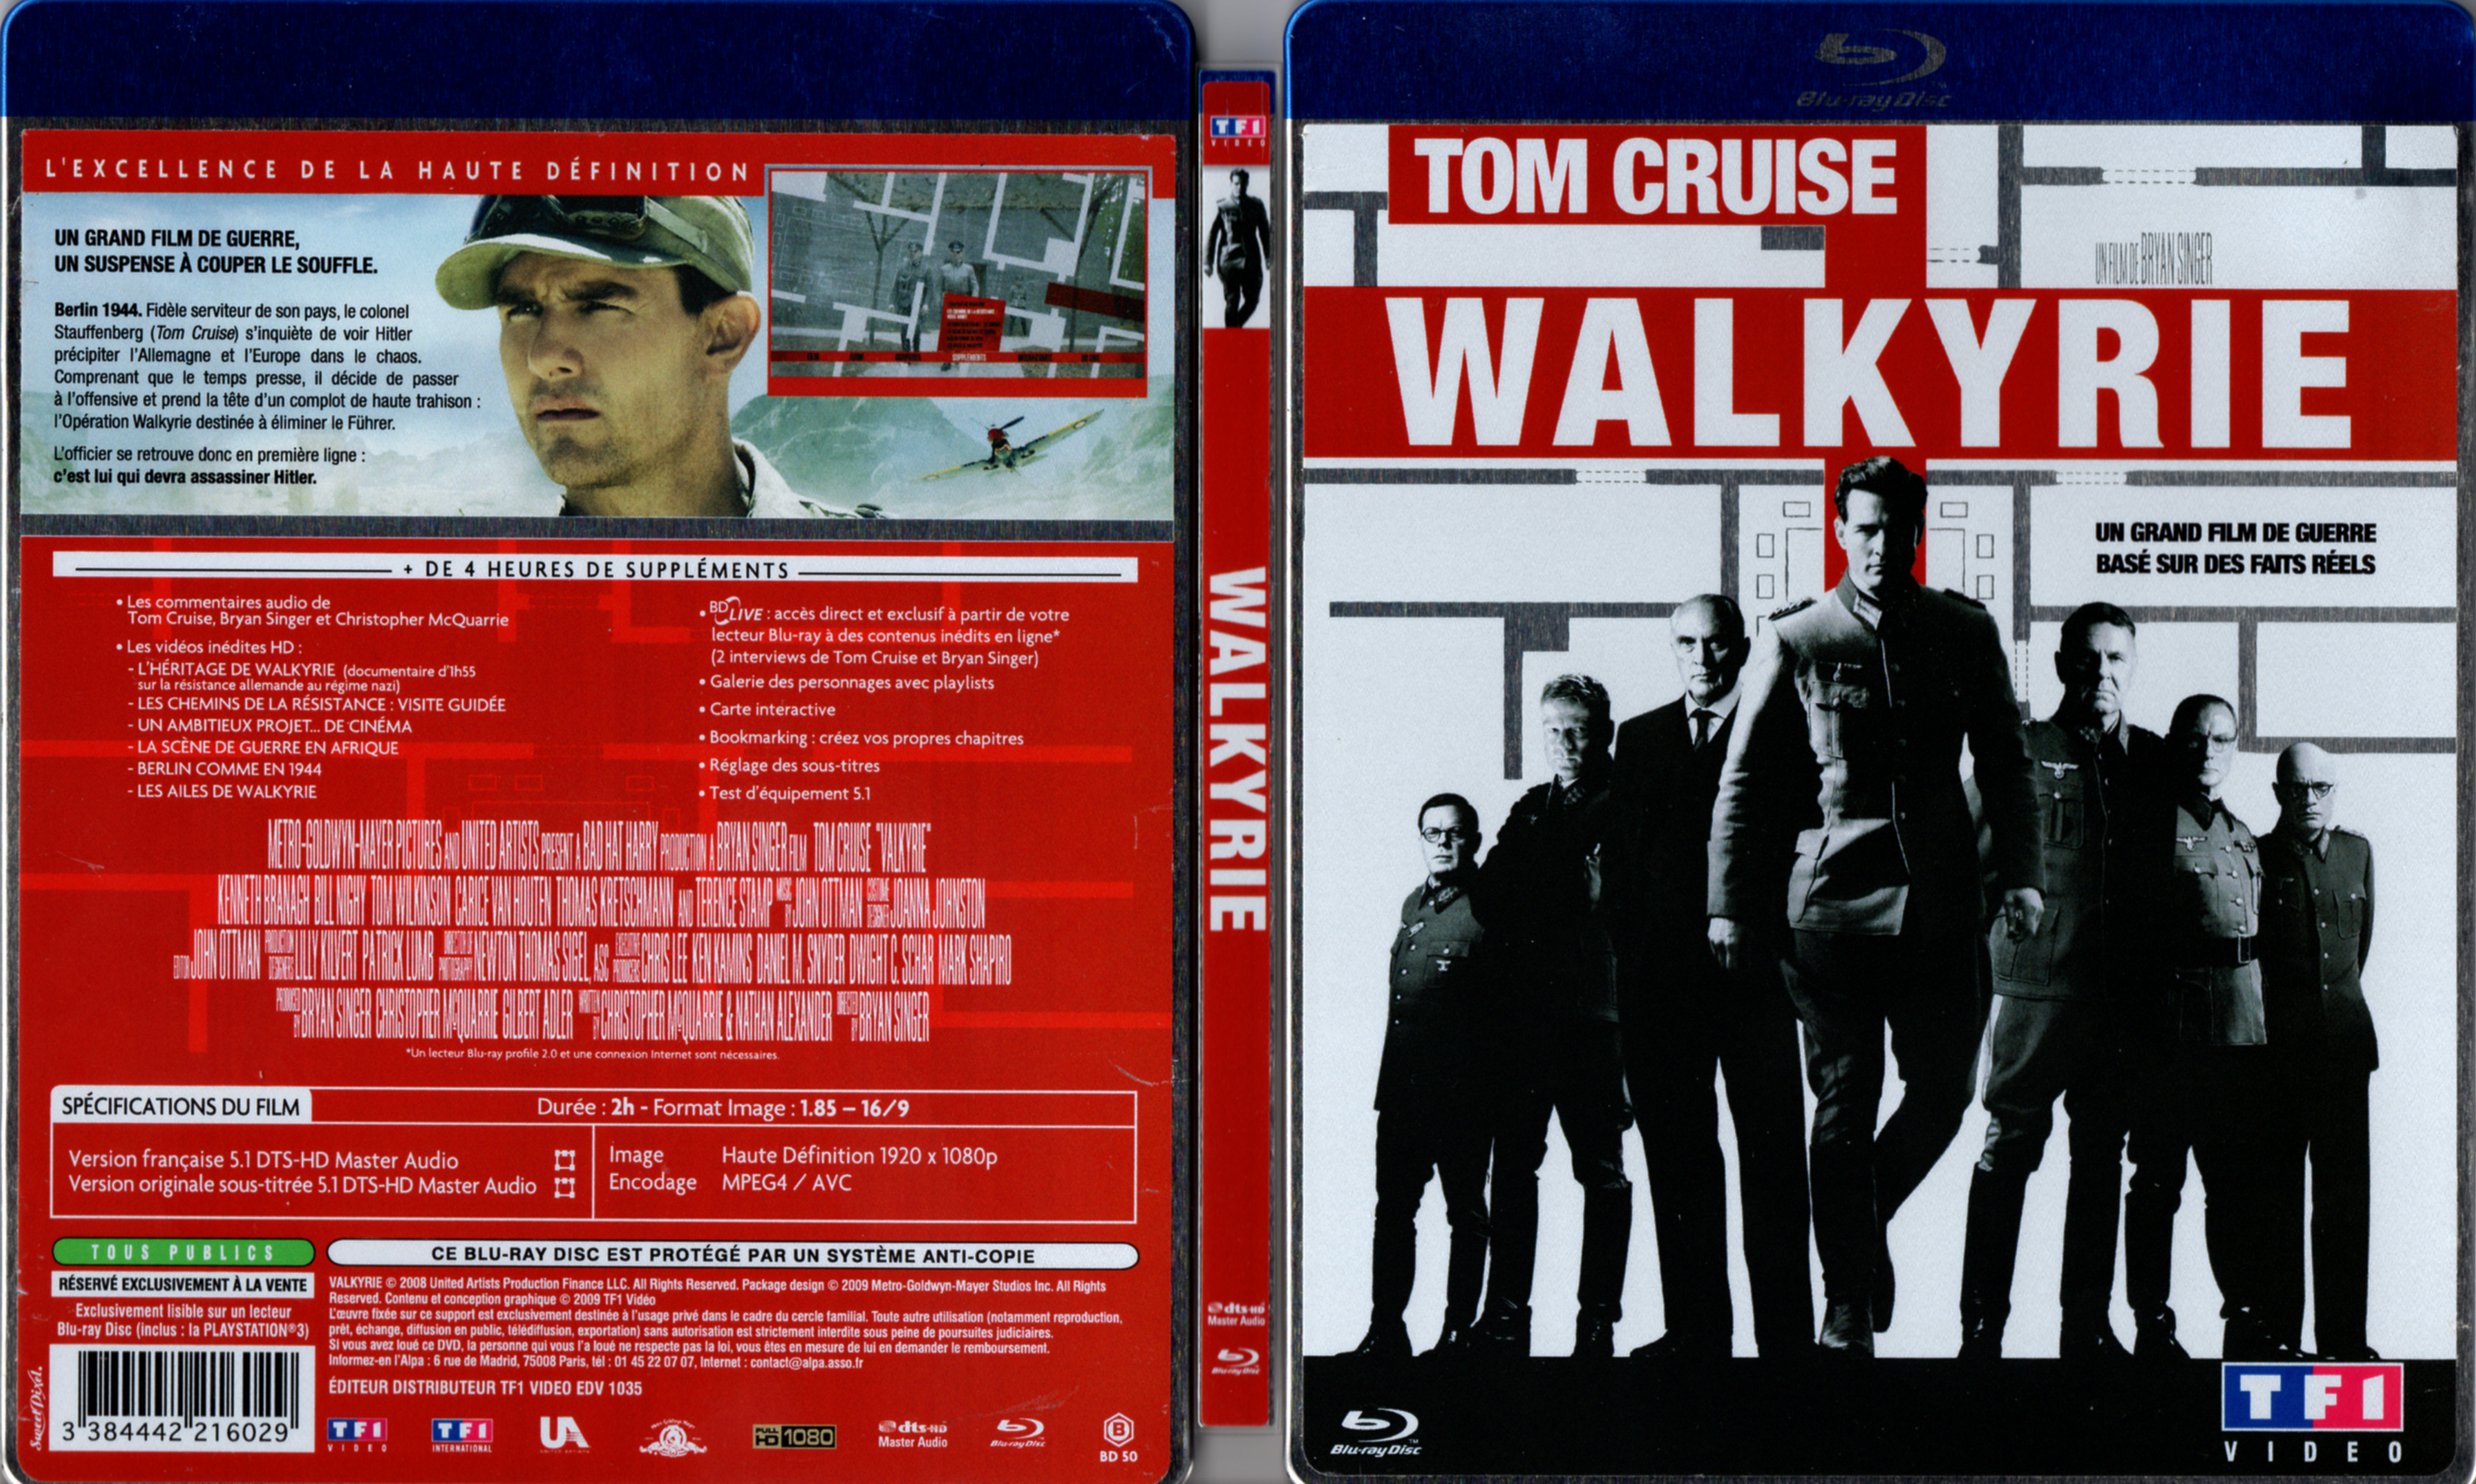 Jaquette DVD Walkyrie (BLU-RAY) v2